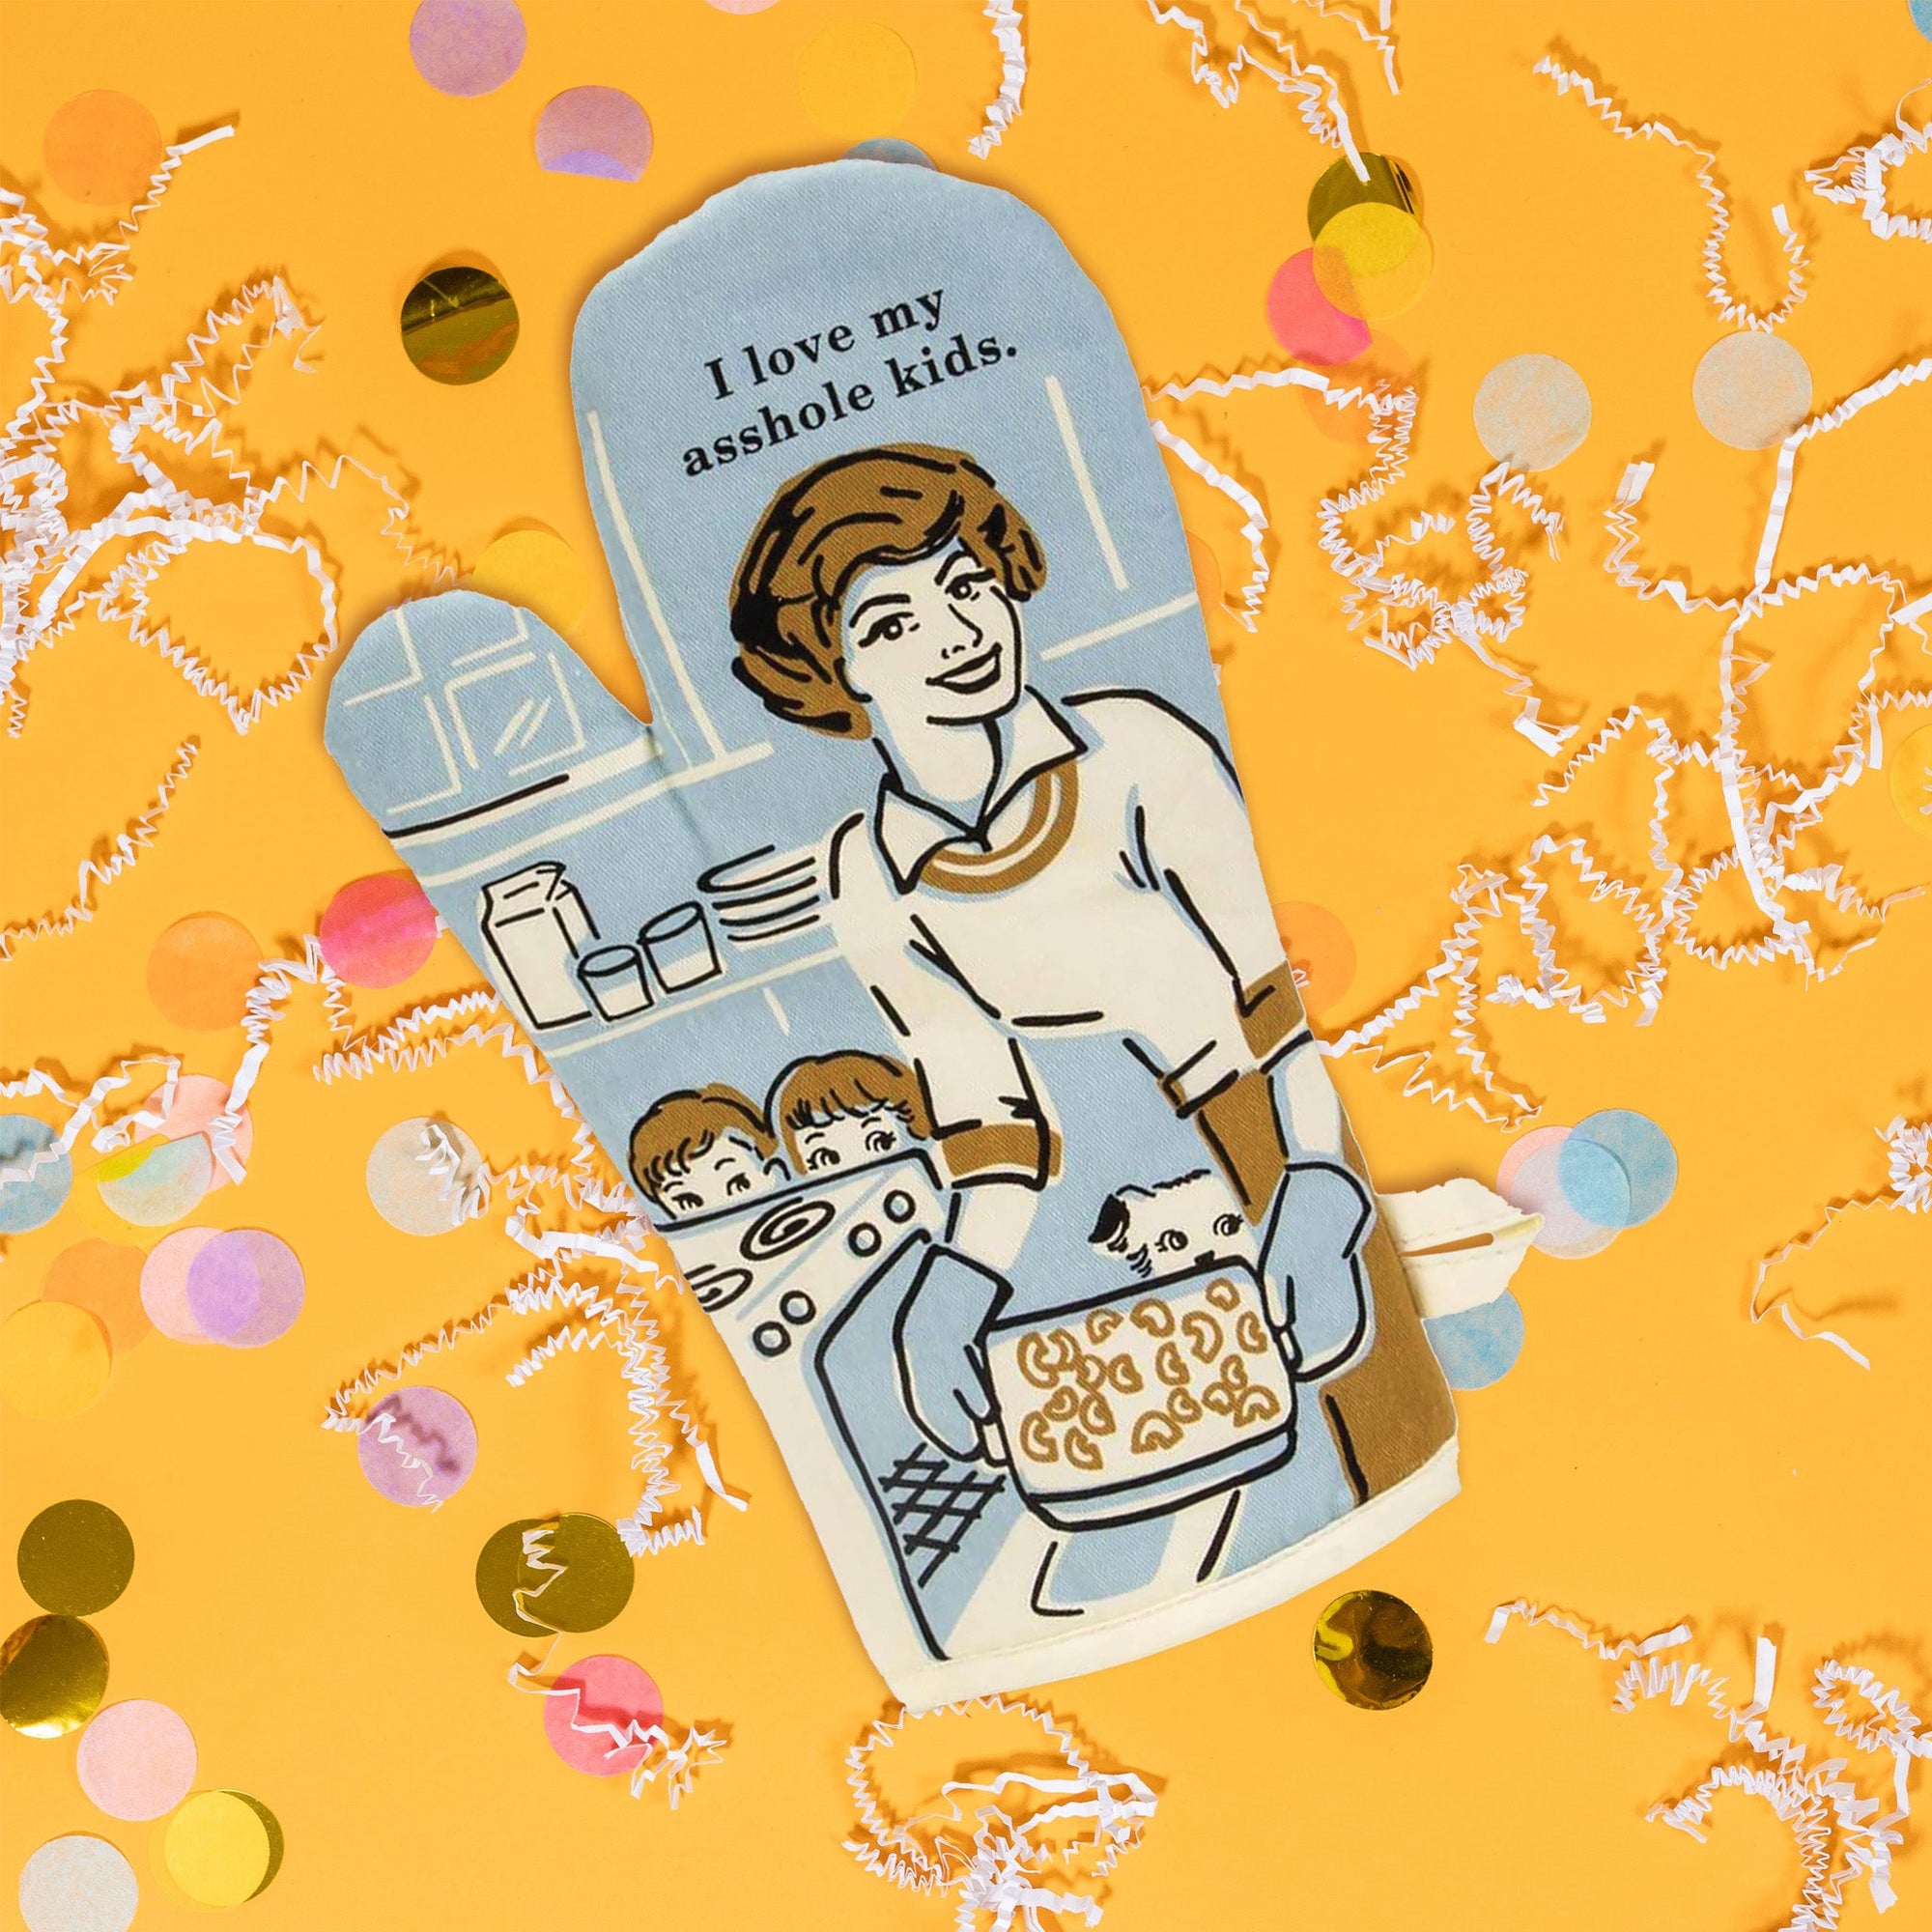 On a sunny mustard background sits an oven mitt with white crinkle and big, colorful confetti scattered around. The front of this light blue oven mitt has a vintage illustration of a woman cooking with a stove, two children and a dog peeking behind her and the stove. The colors are light blue, gold, black, and white. At the top it says "I love my asshole kids." in black serif font.